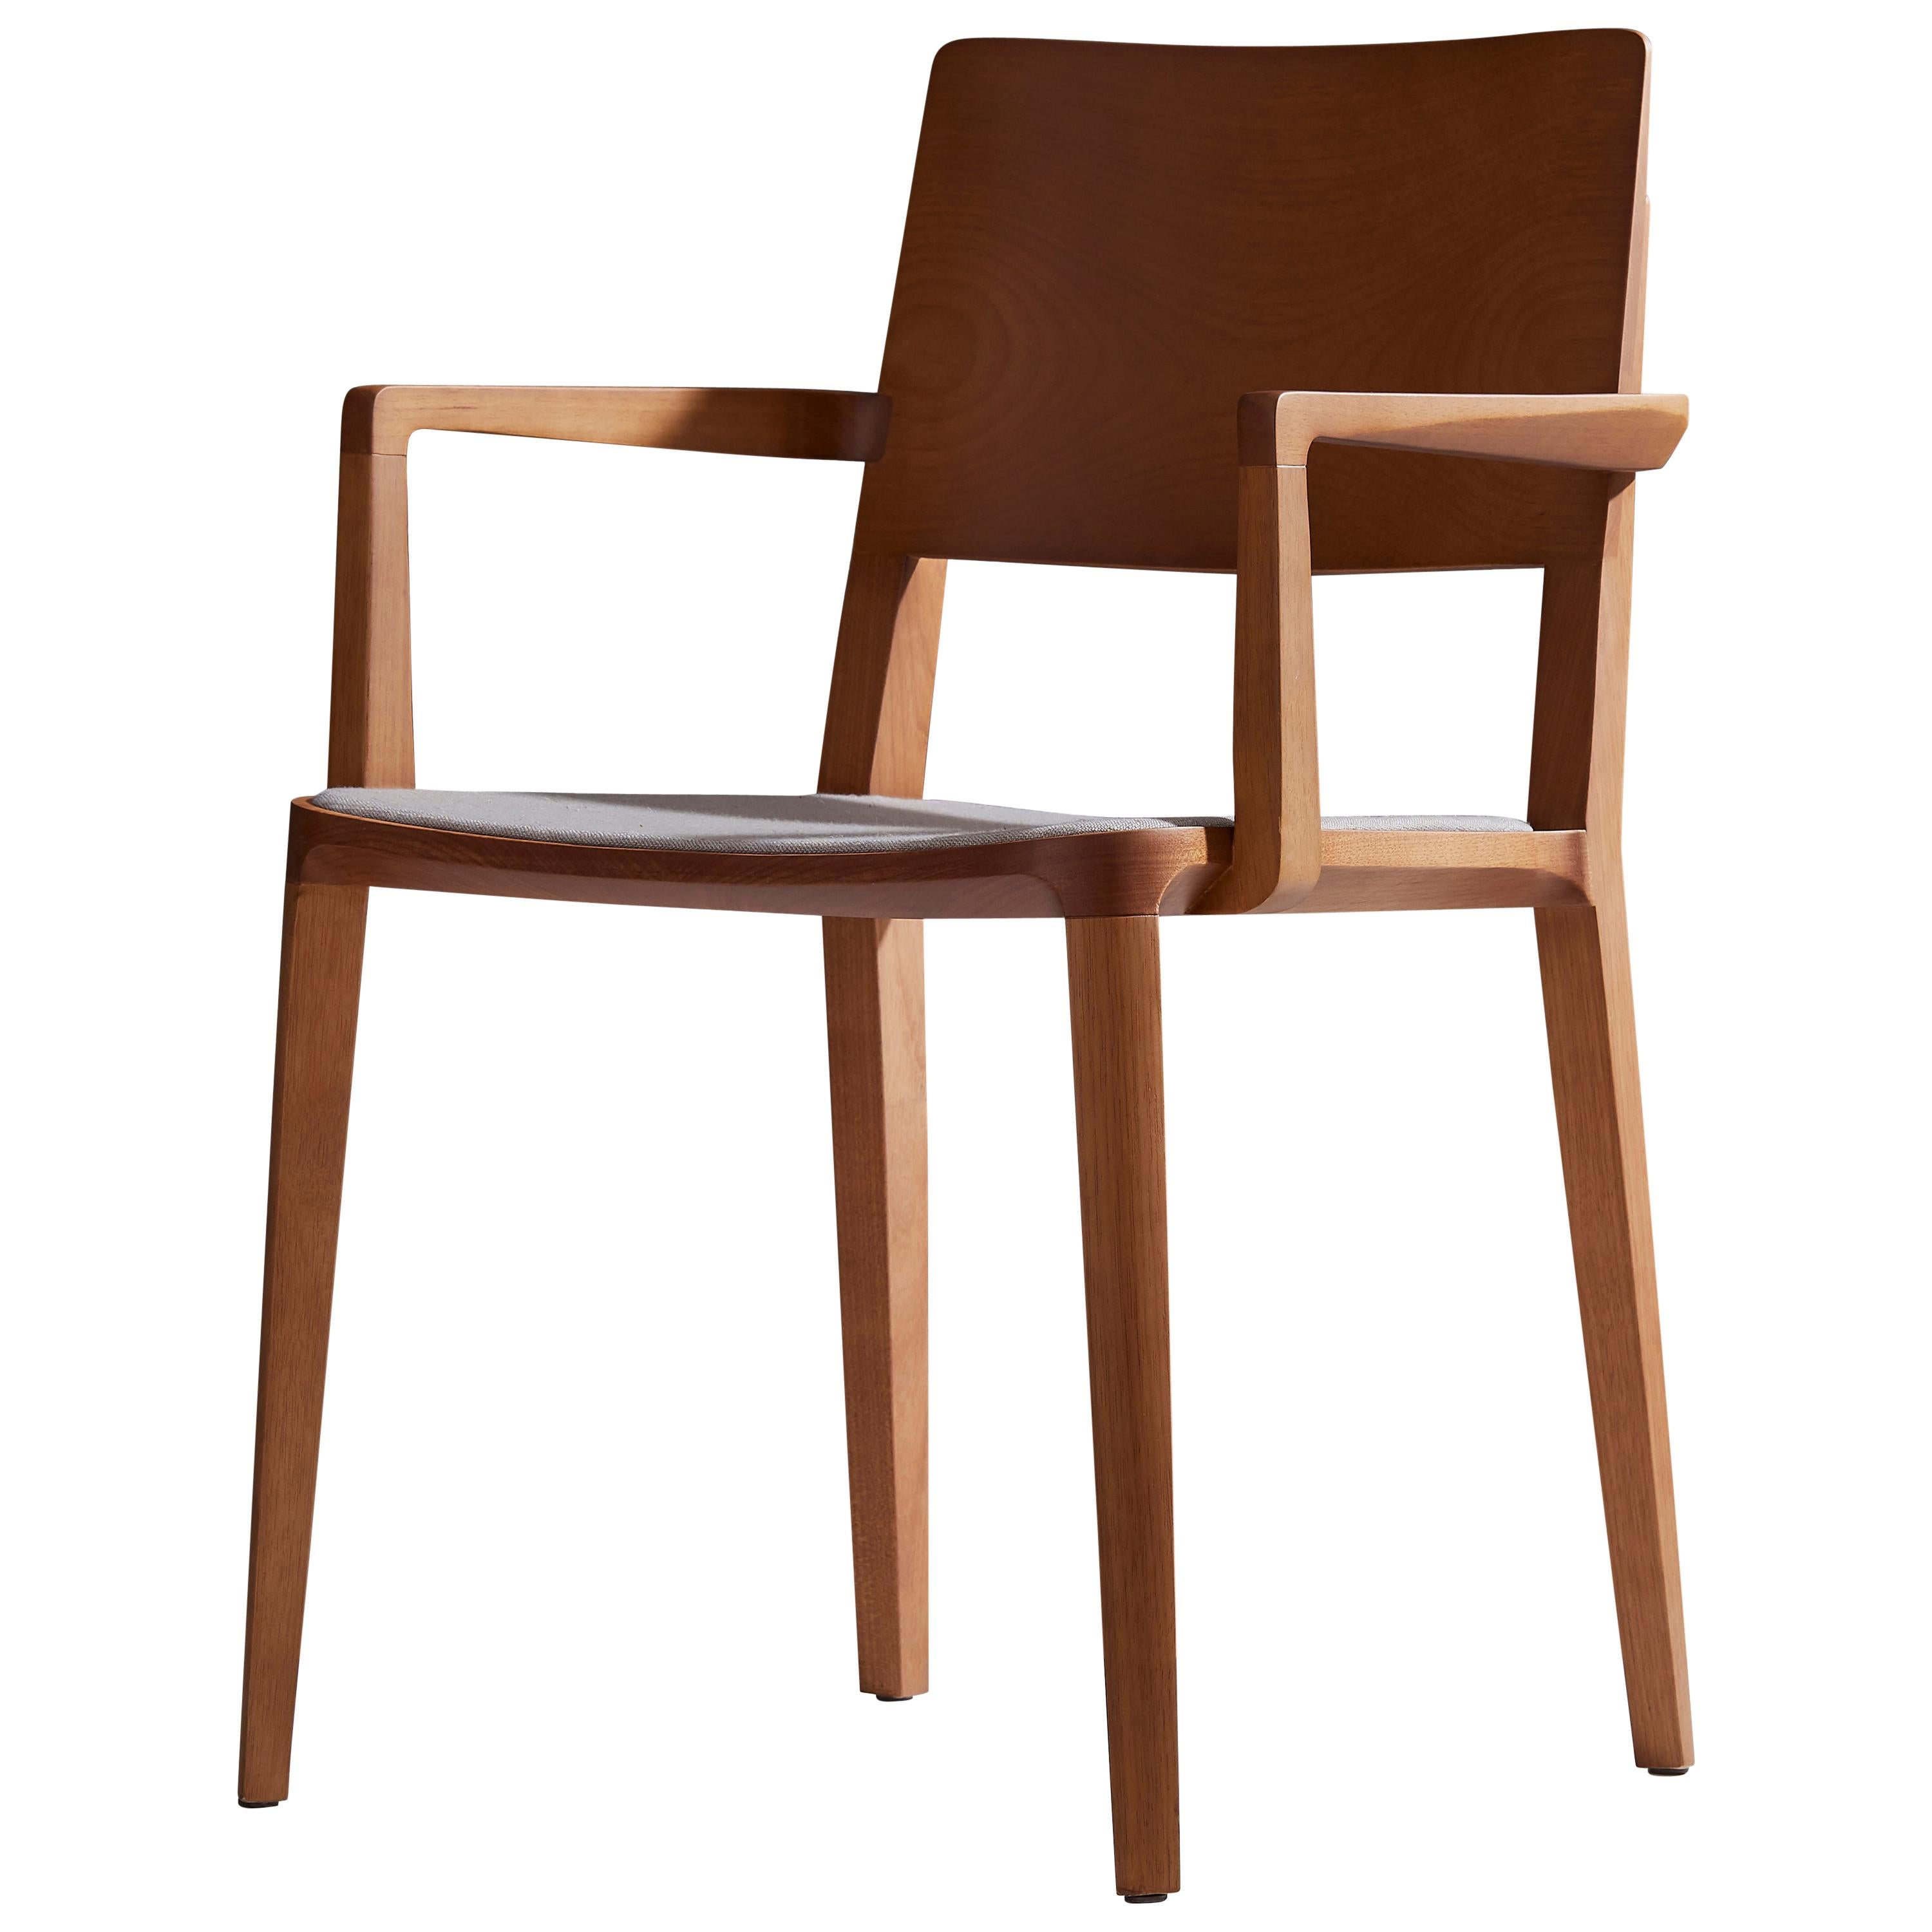 Minimalist Modern Chair in Natural Solid Wood Upholstered Seating with Arms